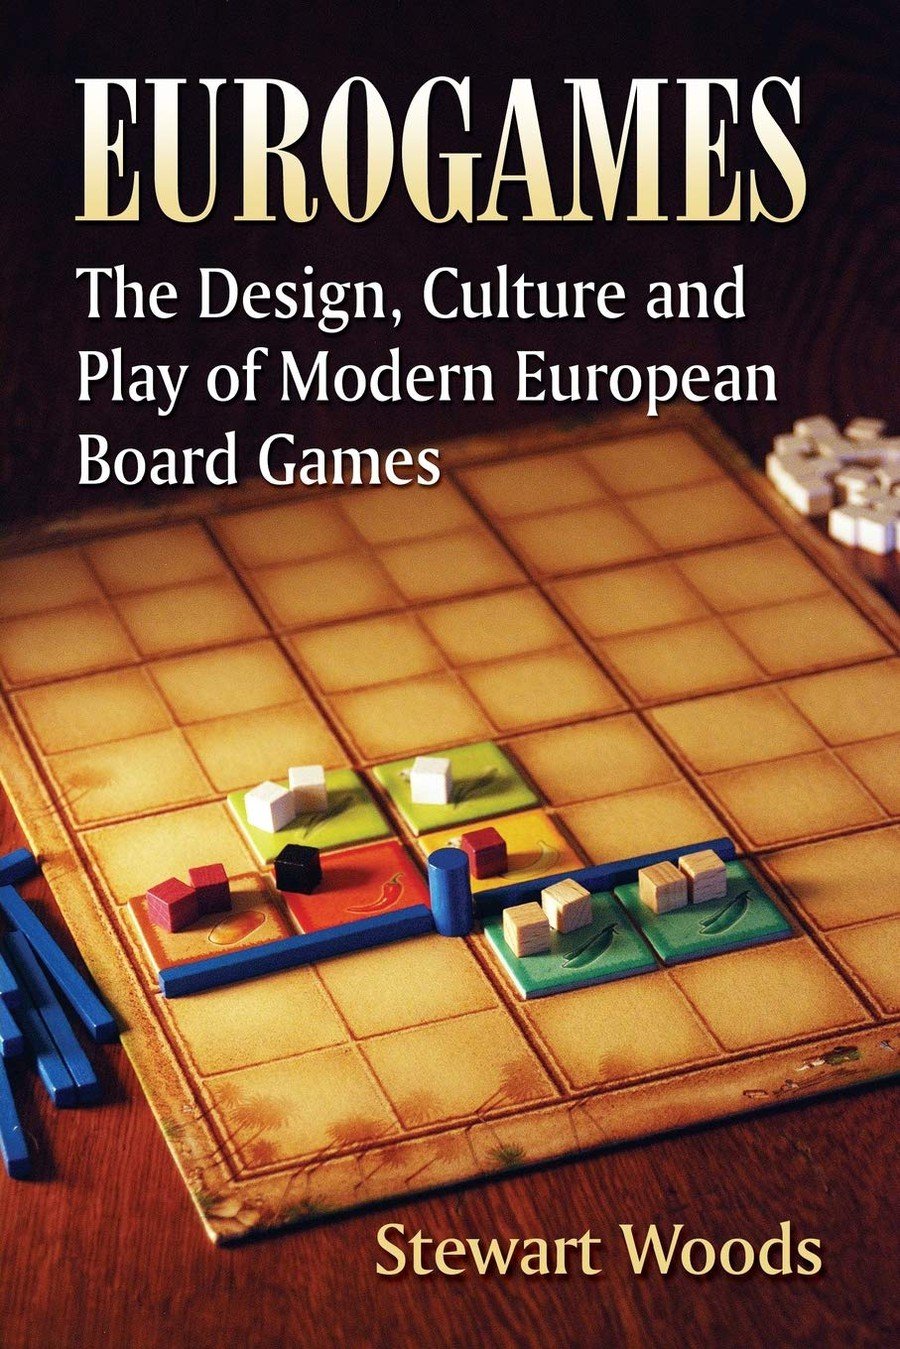 Book - Eurogames: The Design, Culture and Play of Modern European Board Games by Stewart Woods